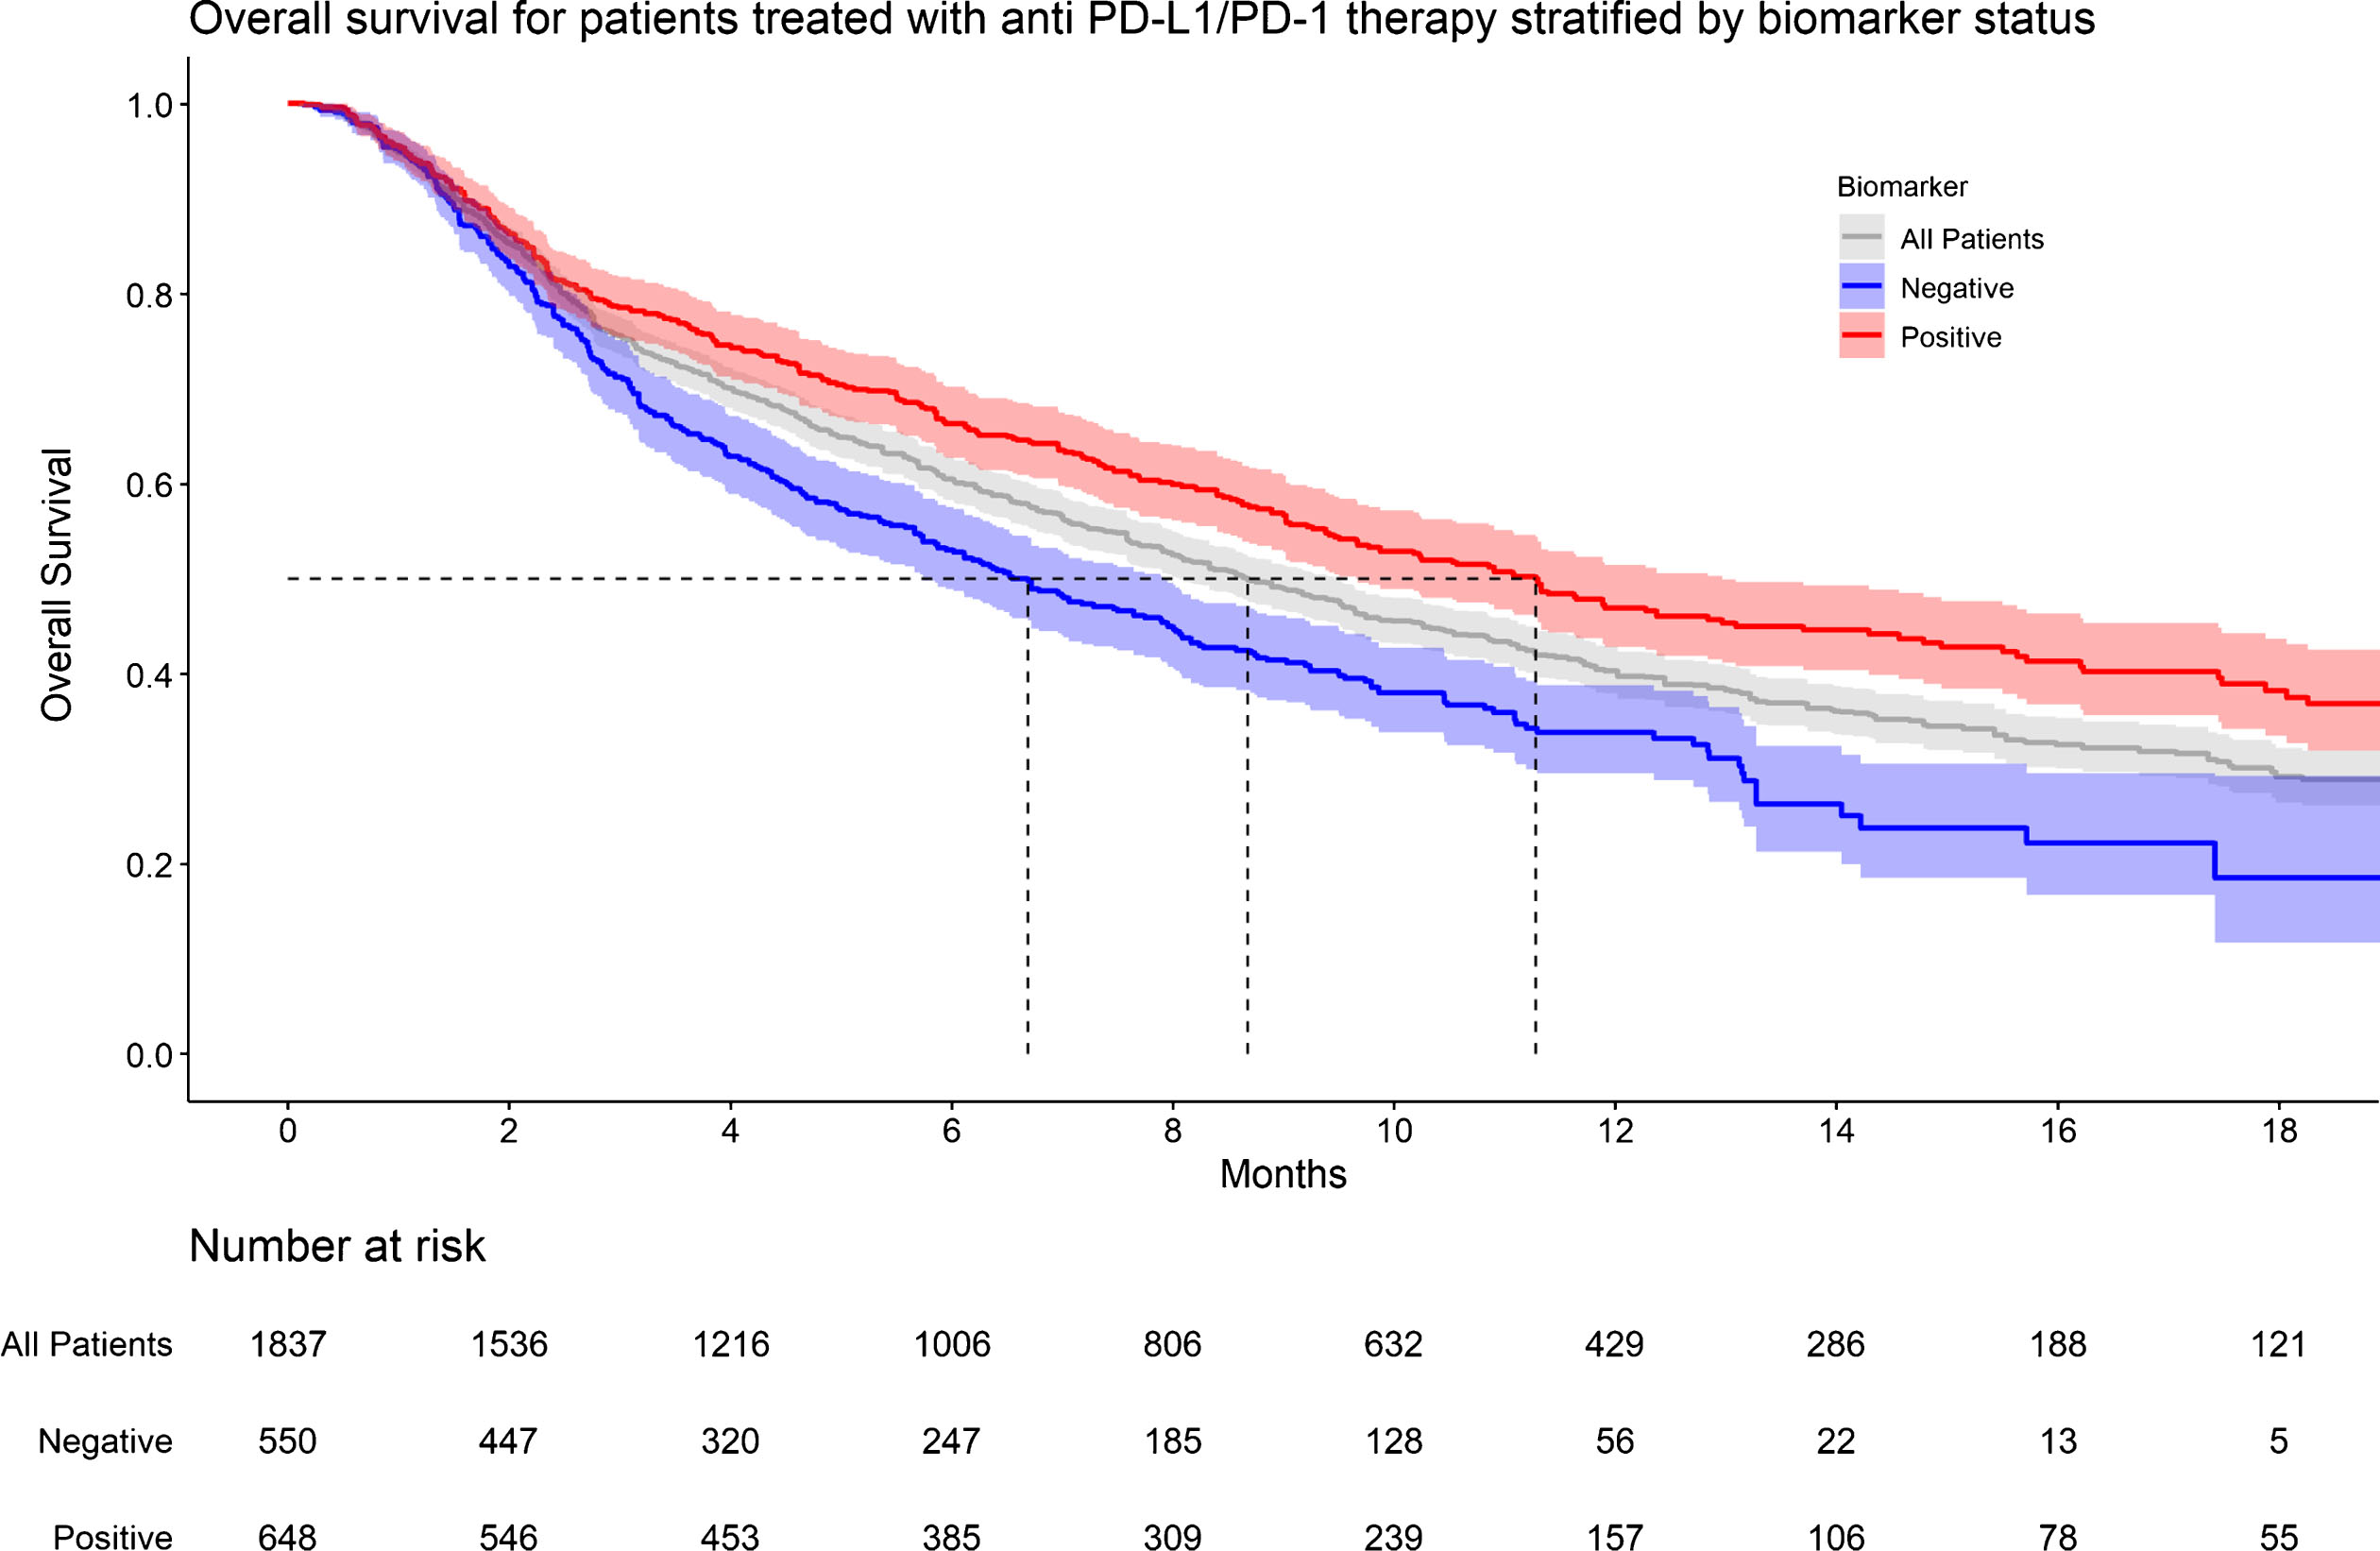 KM graph of overall survival for patients treated with anti PD-L1/PD-1 therapy stratified by biomarker status.